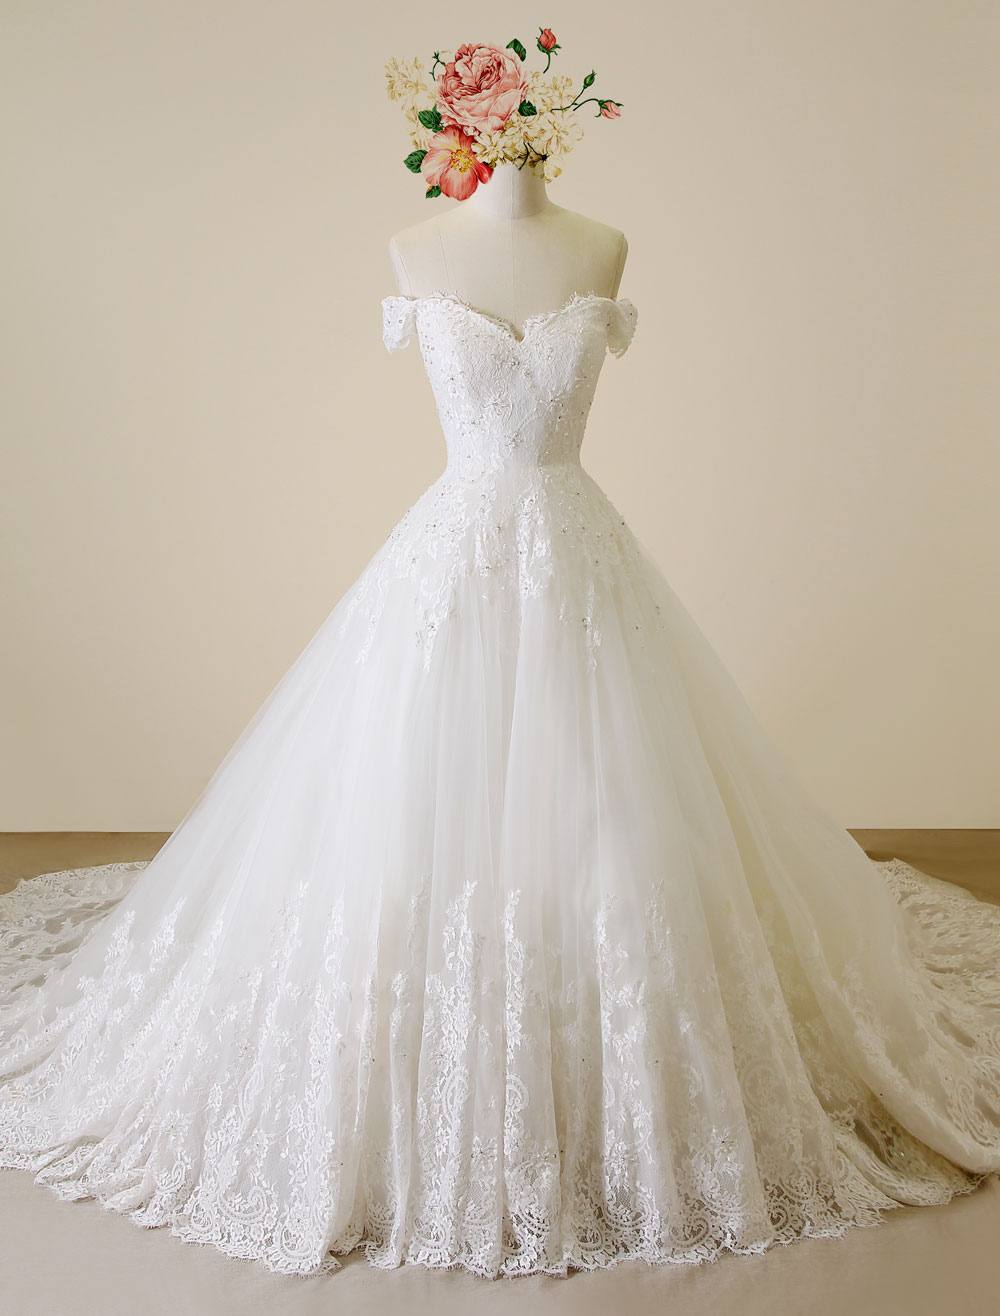 Ivory Wedding Dress Off-The-Shoulder Lace Tulle Wedding Gown - Milanoo.com